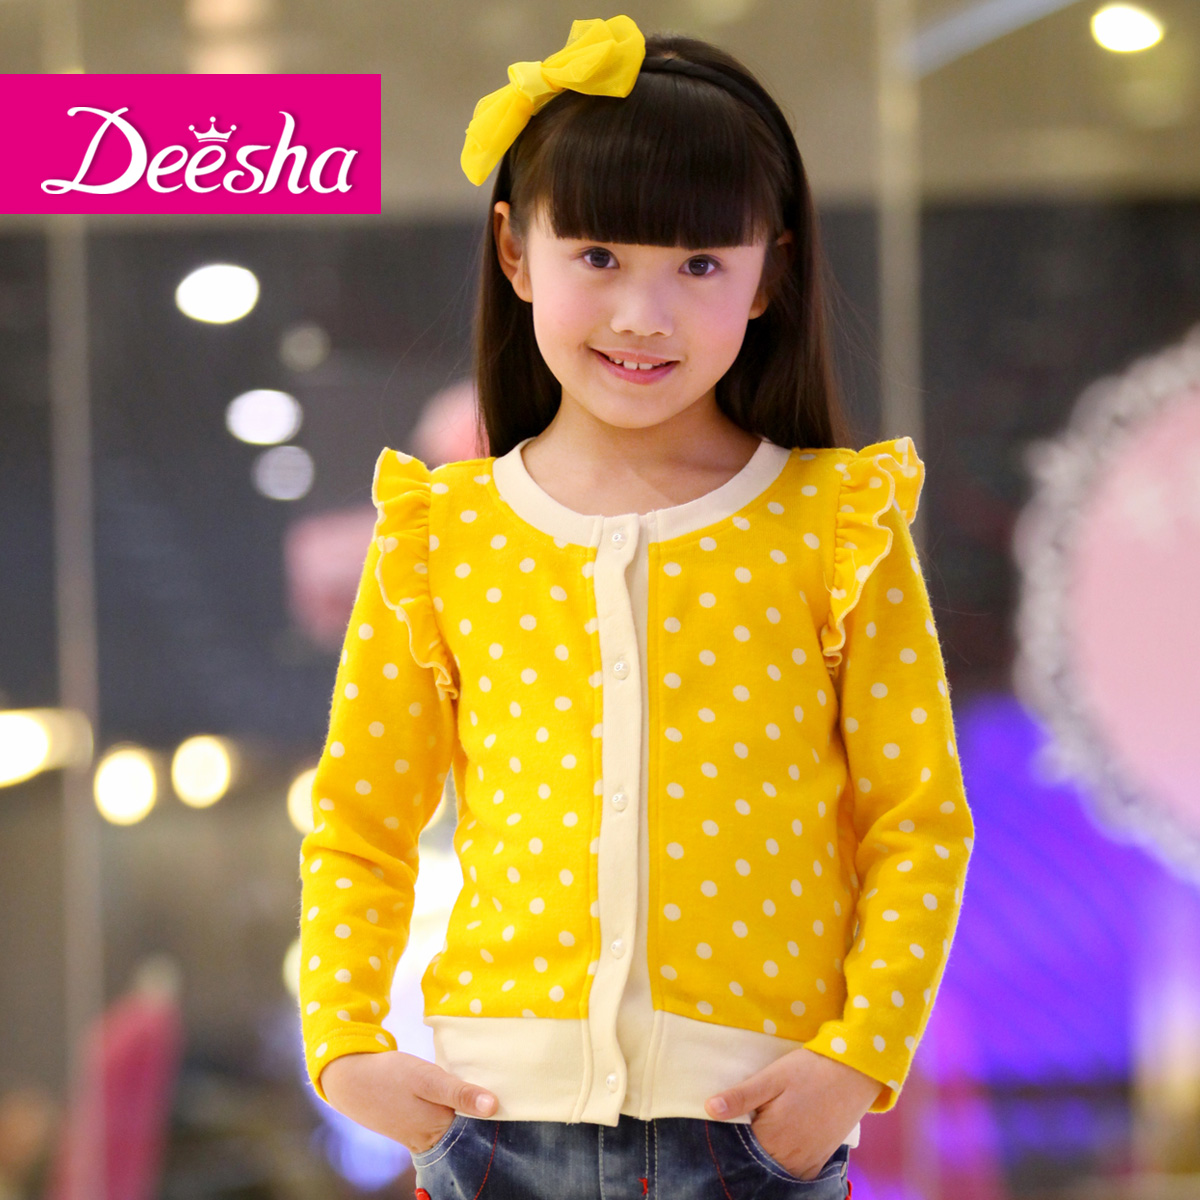 Aimi DEESHA children's clothing 2013 spring new arrival girls clothing child long-sleeve cardigan outerwear 1311117